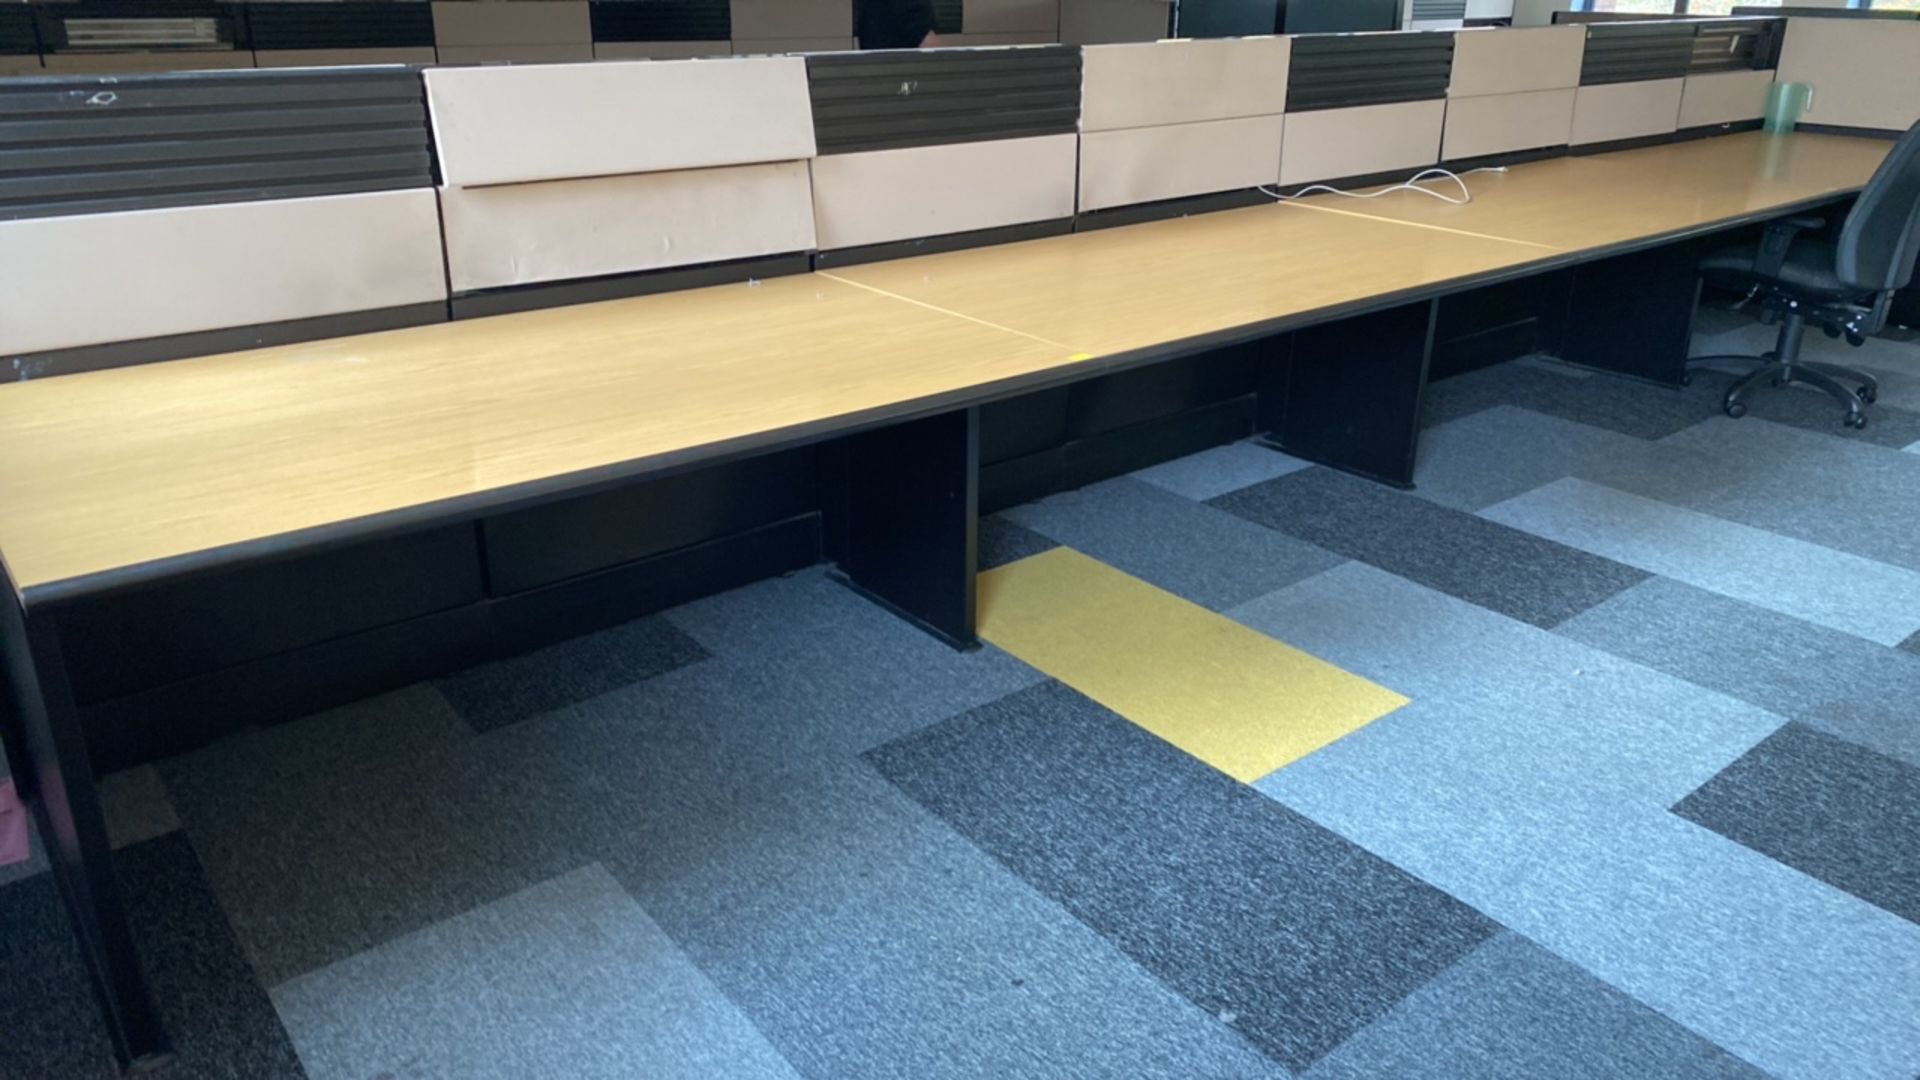 Bank Of 4 Wooden Desks With Black Legs - Image 2 of 6